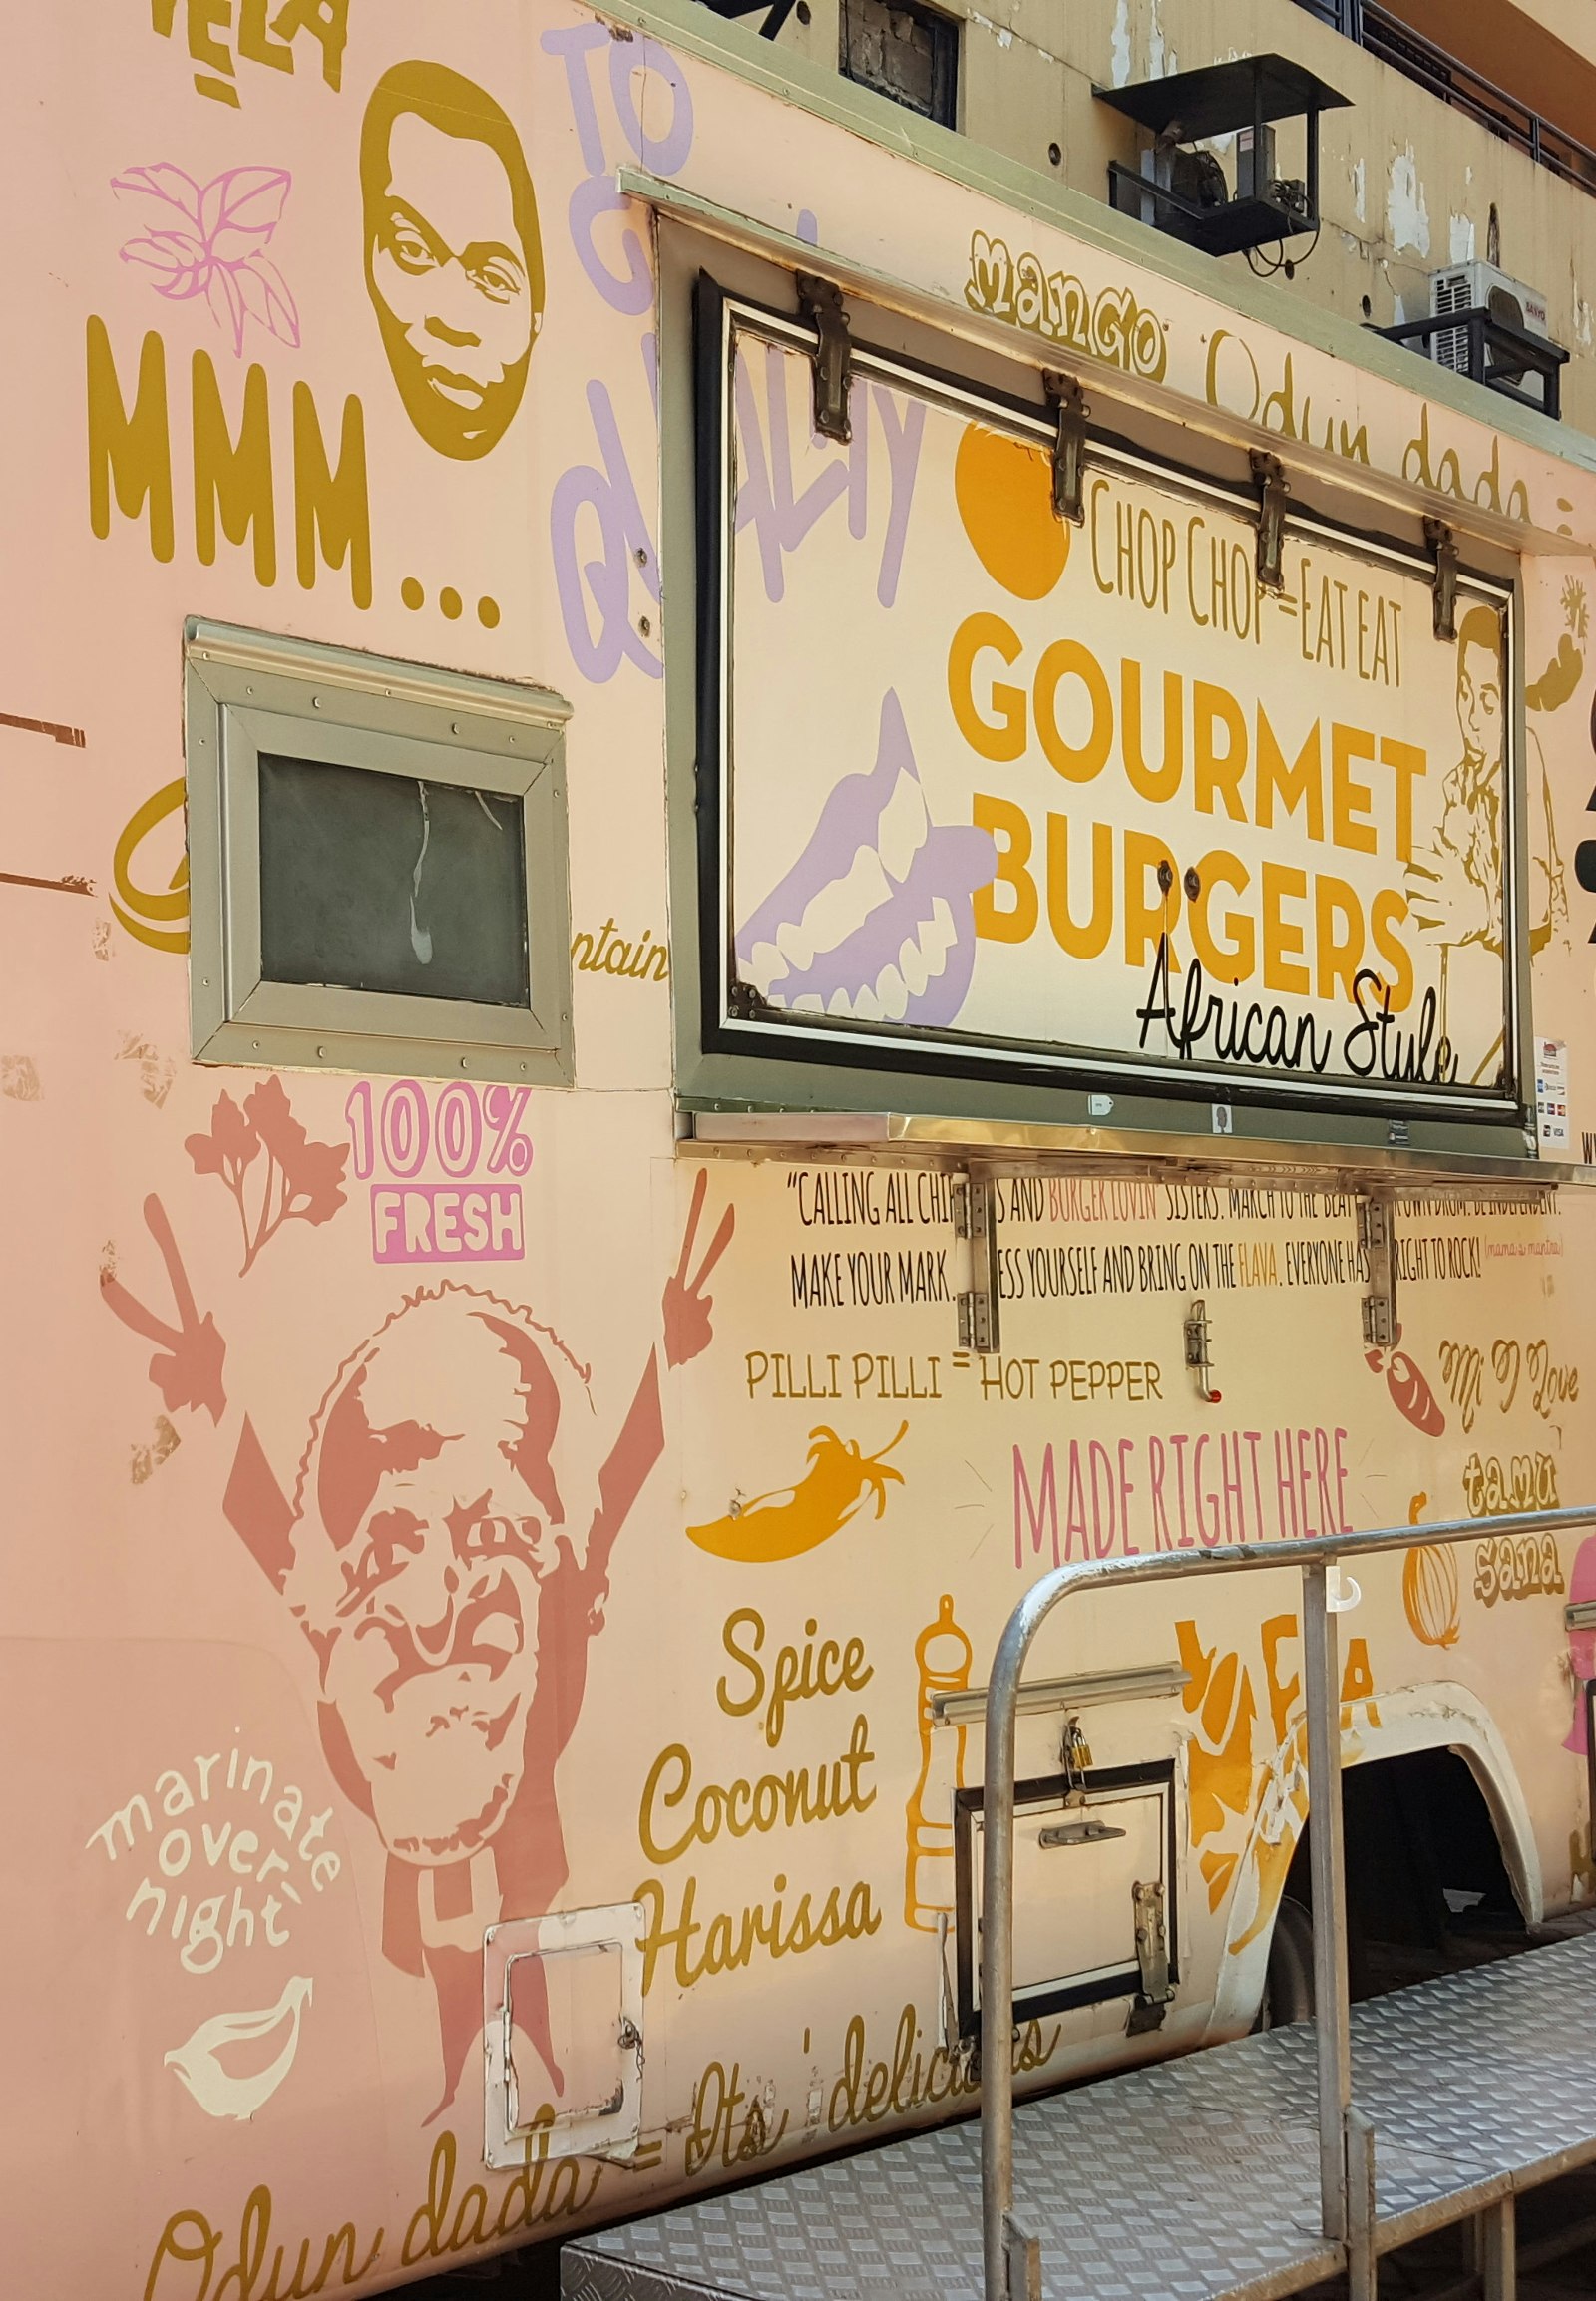 The Mama Rocks food truck sits with its service window closed. The back portion of the truck is covered in monochomatic images and text, calling out dishes like gourmet burgers© Clementine Logan / Lonely Planet